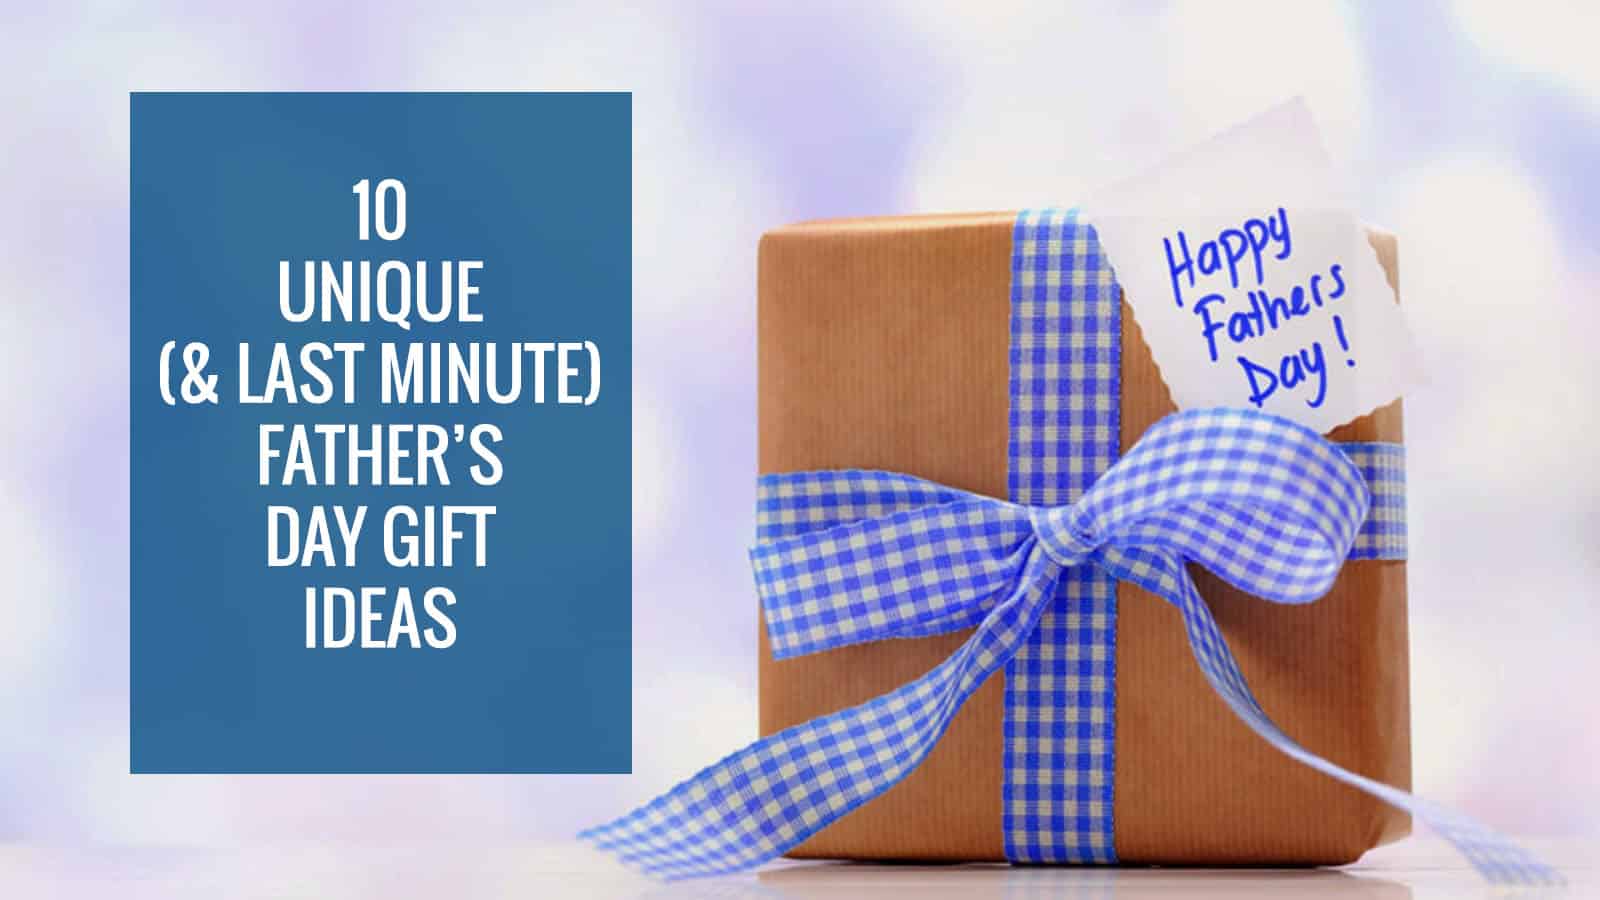 10 Unique (and Last Minute) Father's Day Gift Ideas - Princeton Properties